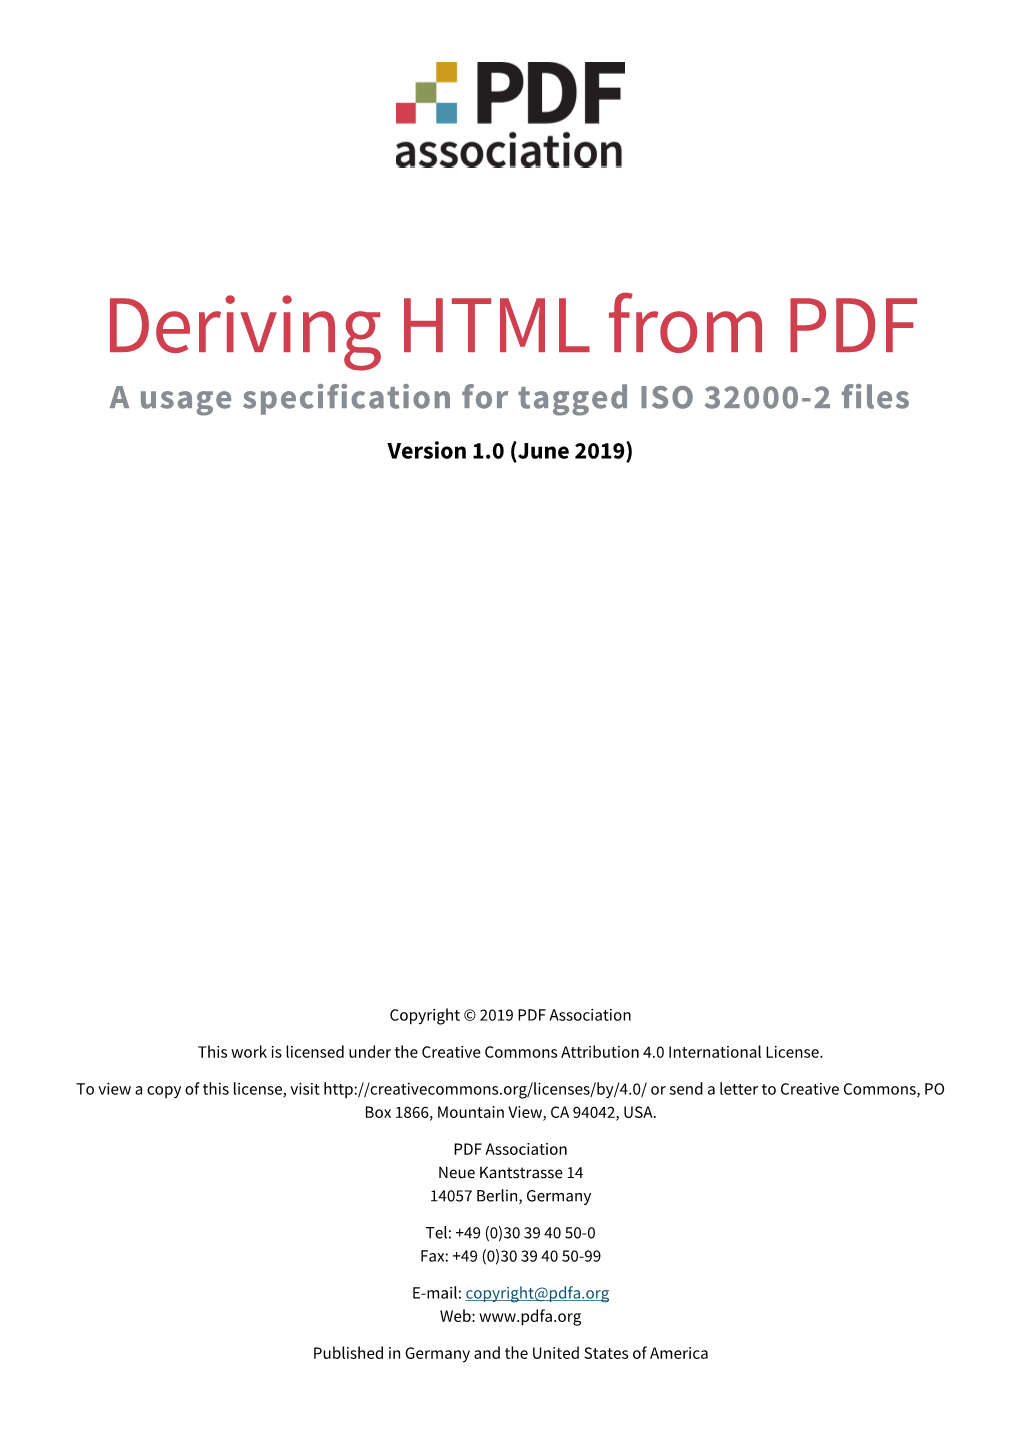 Deriving HTML from PDF a Usage Specification for Tagged ISO 32000-2 Files Version 1.0 (June 2019)